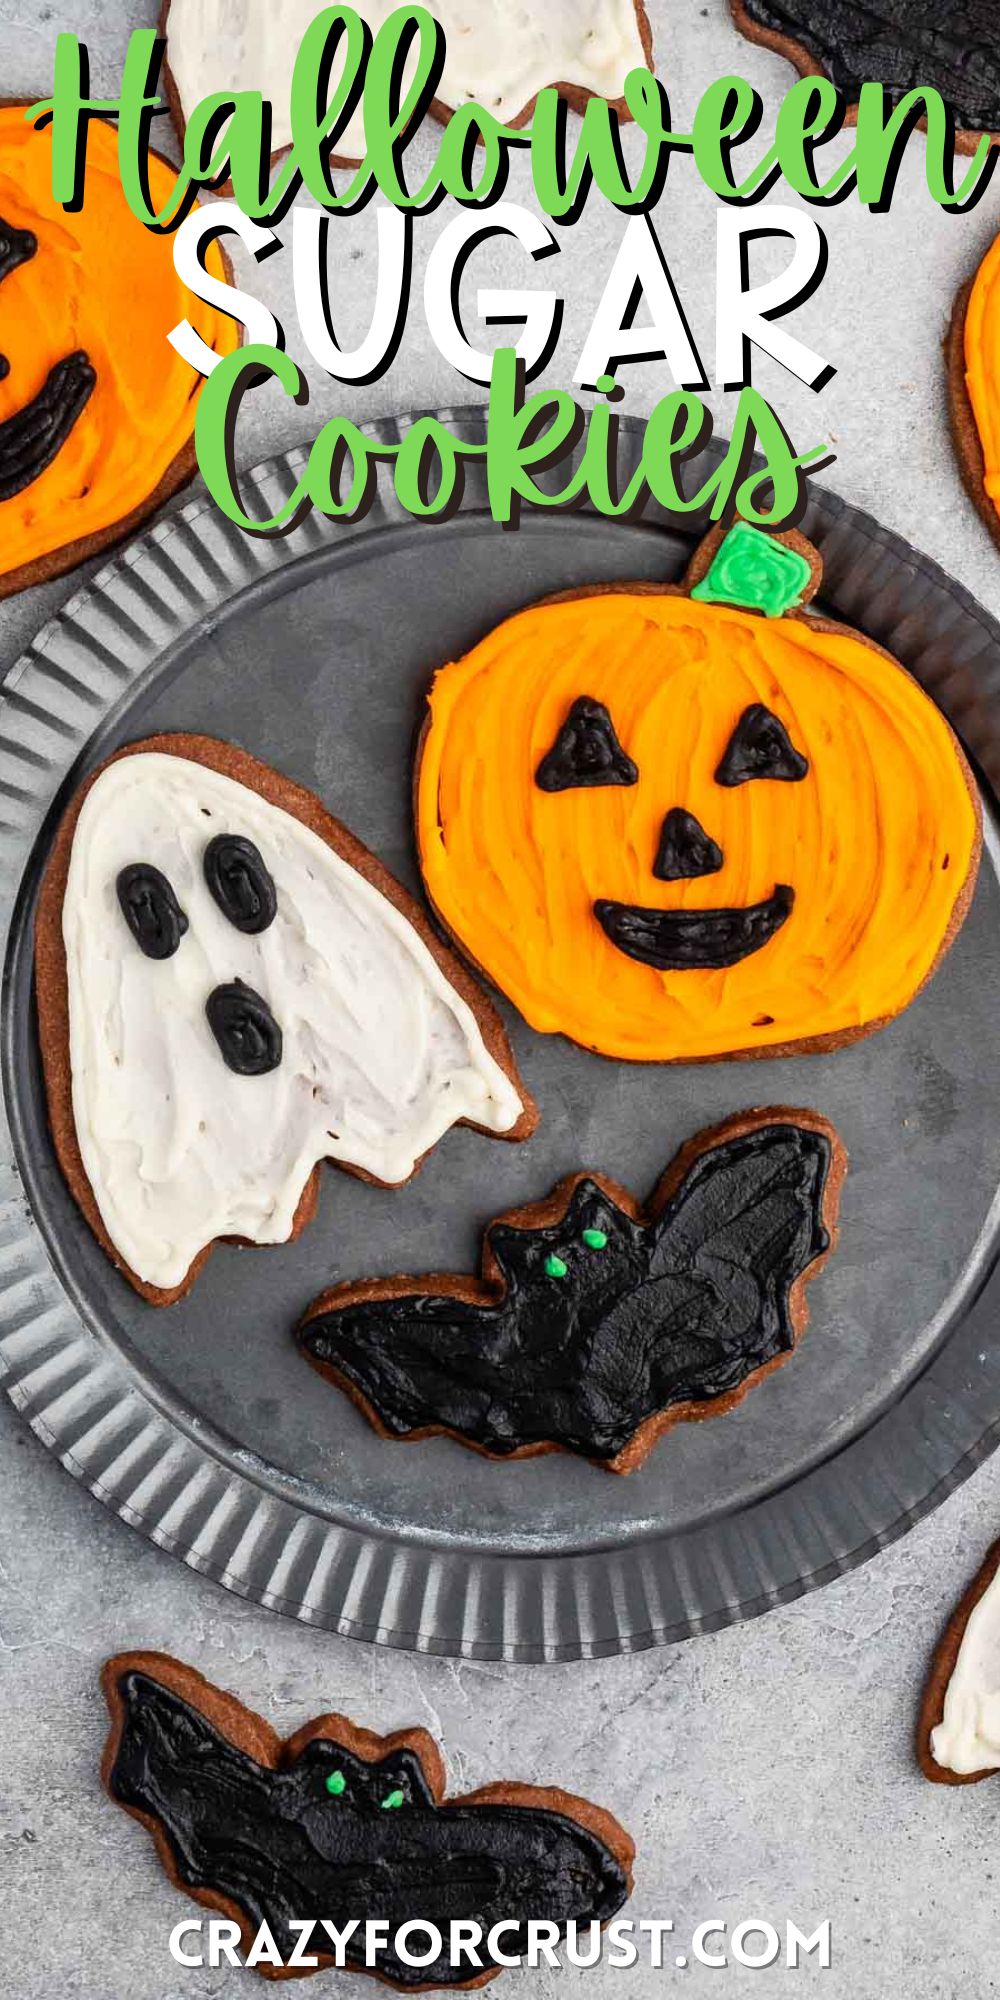 sugar cookies shaped like halloween characters and frosted with orange, white and black with words on the image.